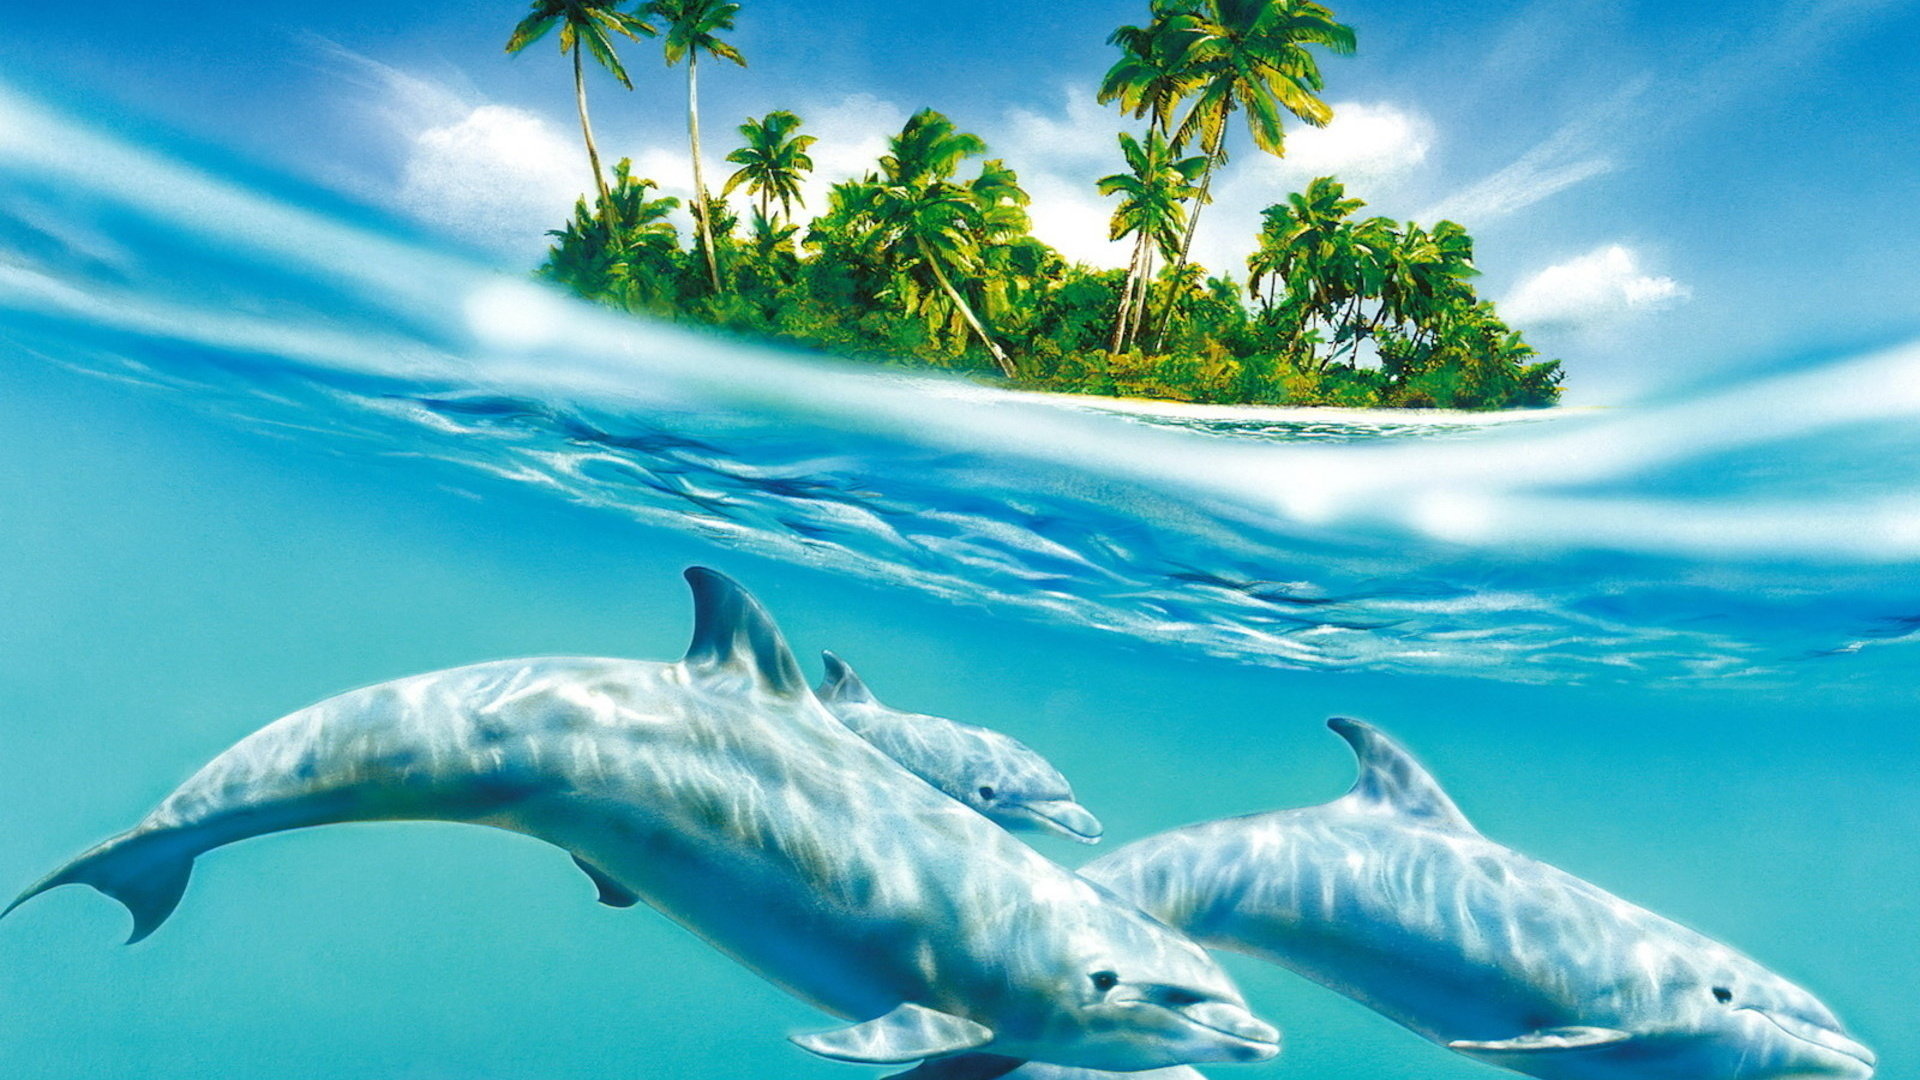 Download hd 1920x1080 Dolphin PC background ID:248375 for free